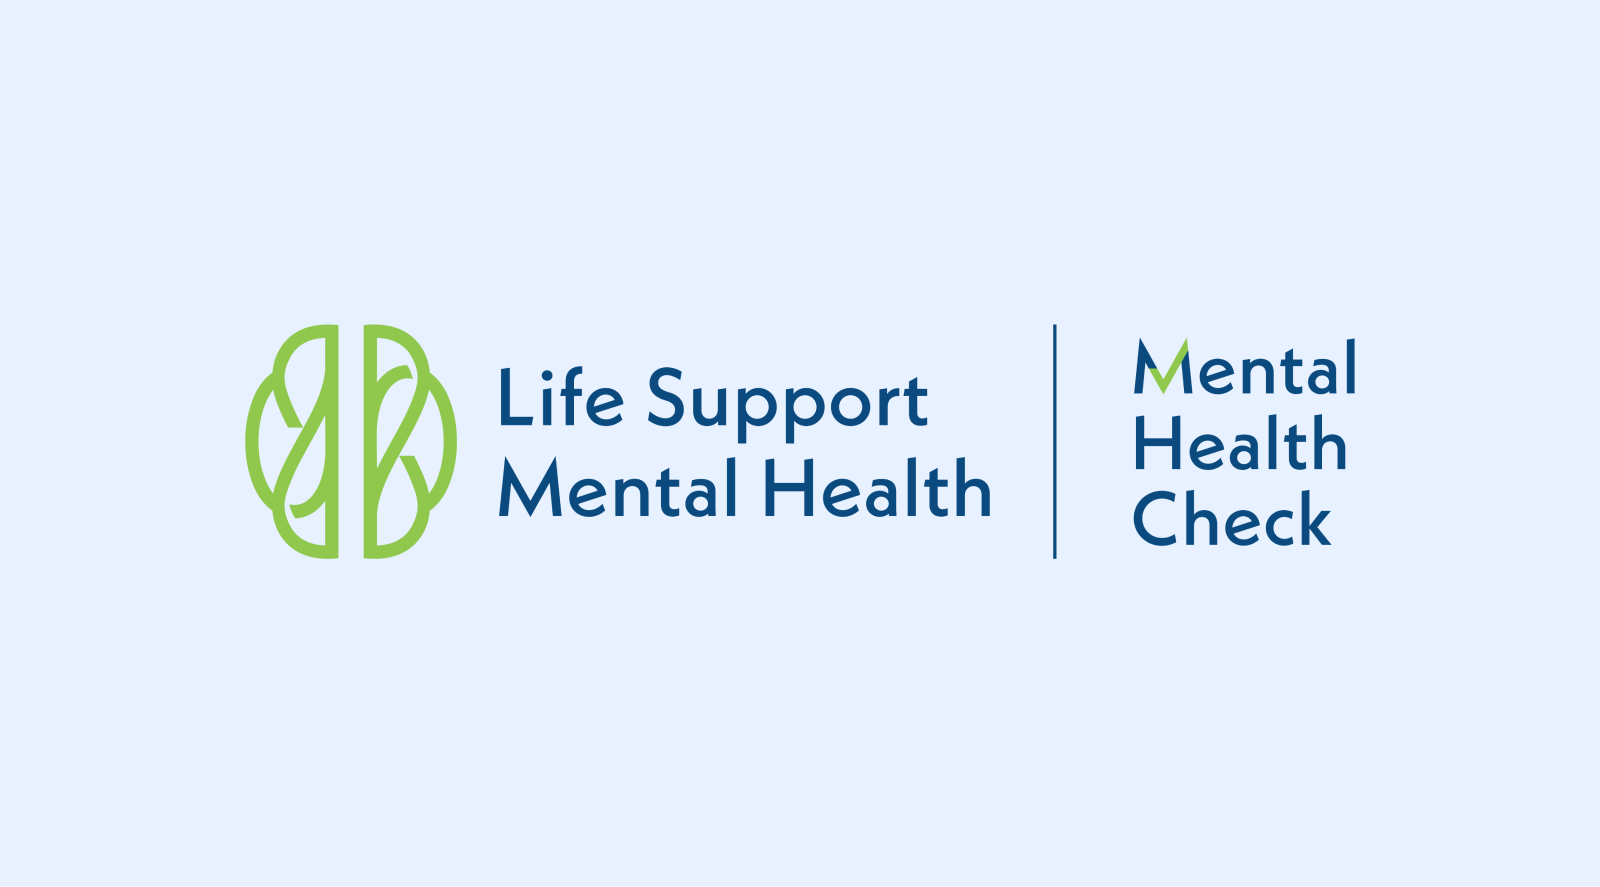 Life Support mental health